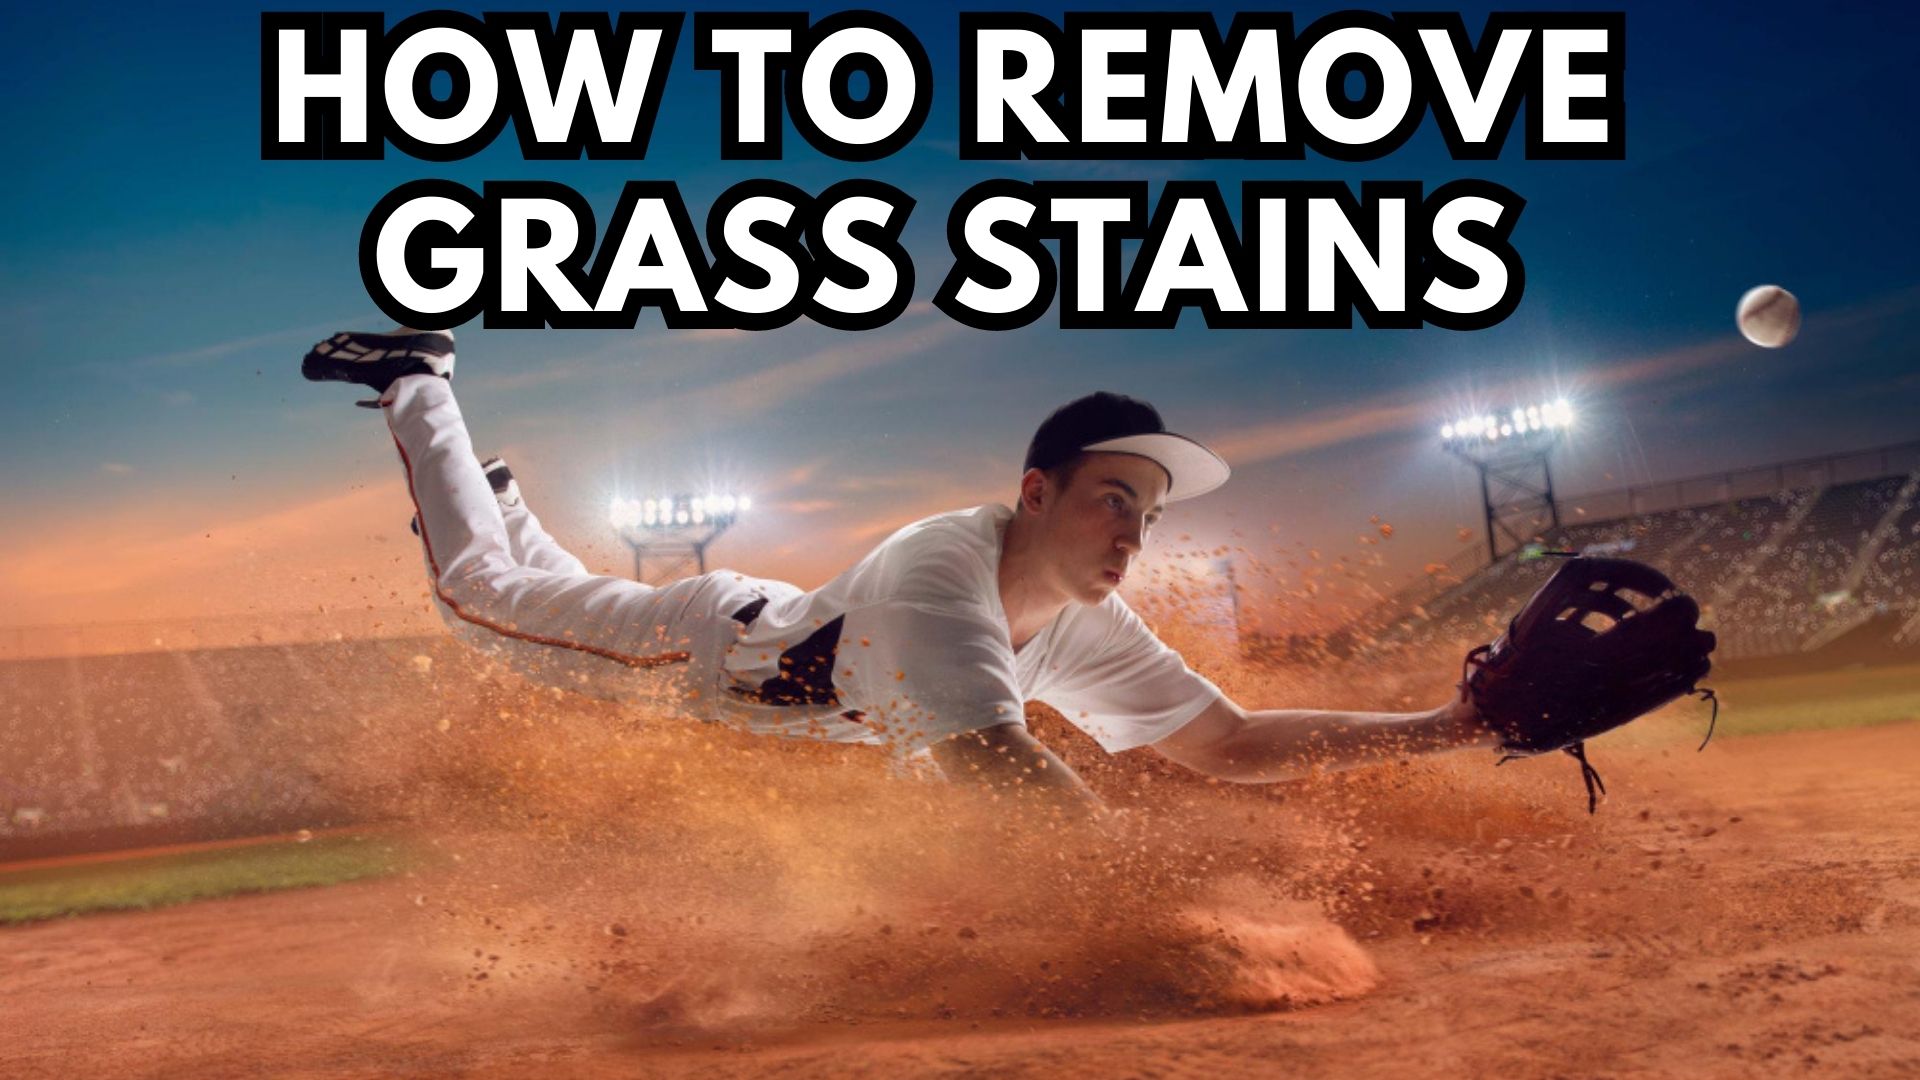 How To Get Grass Stains Out Of Baseball Pants